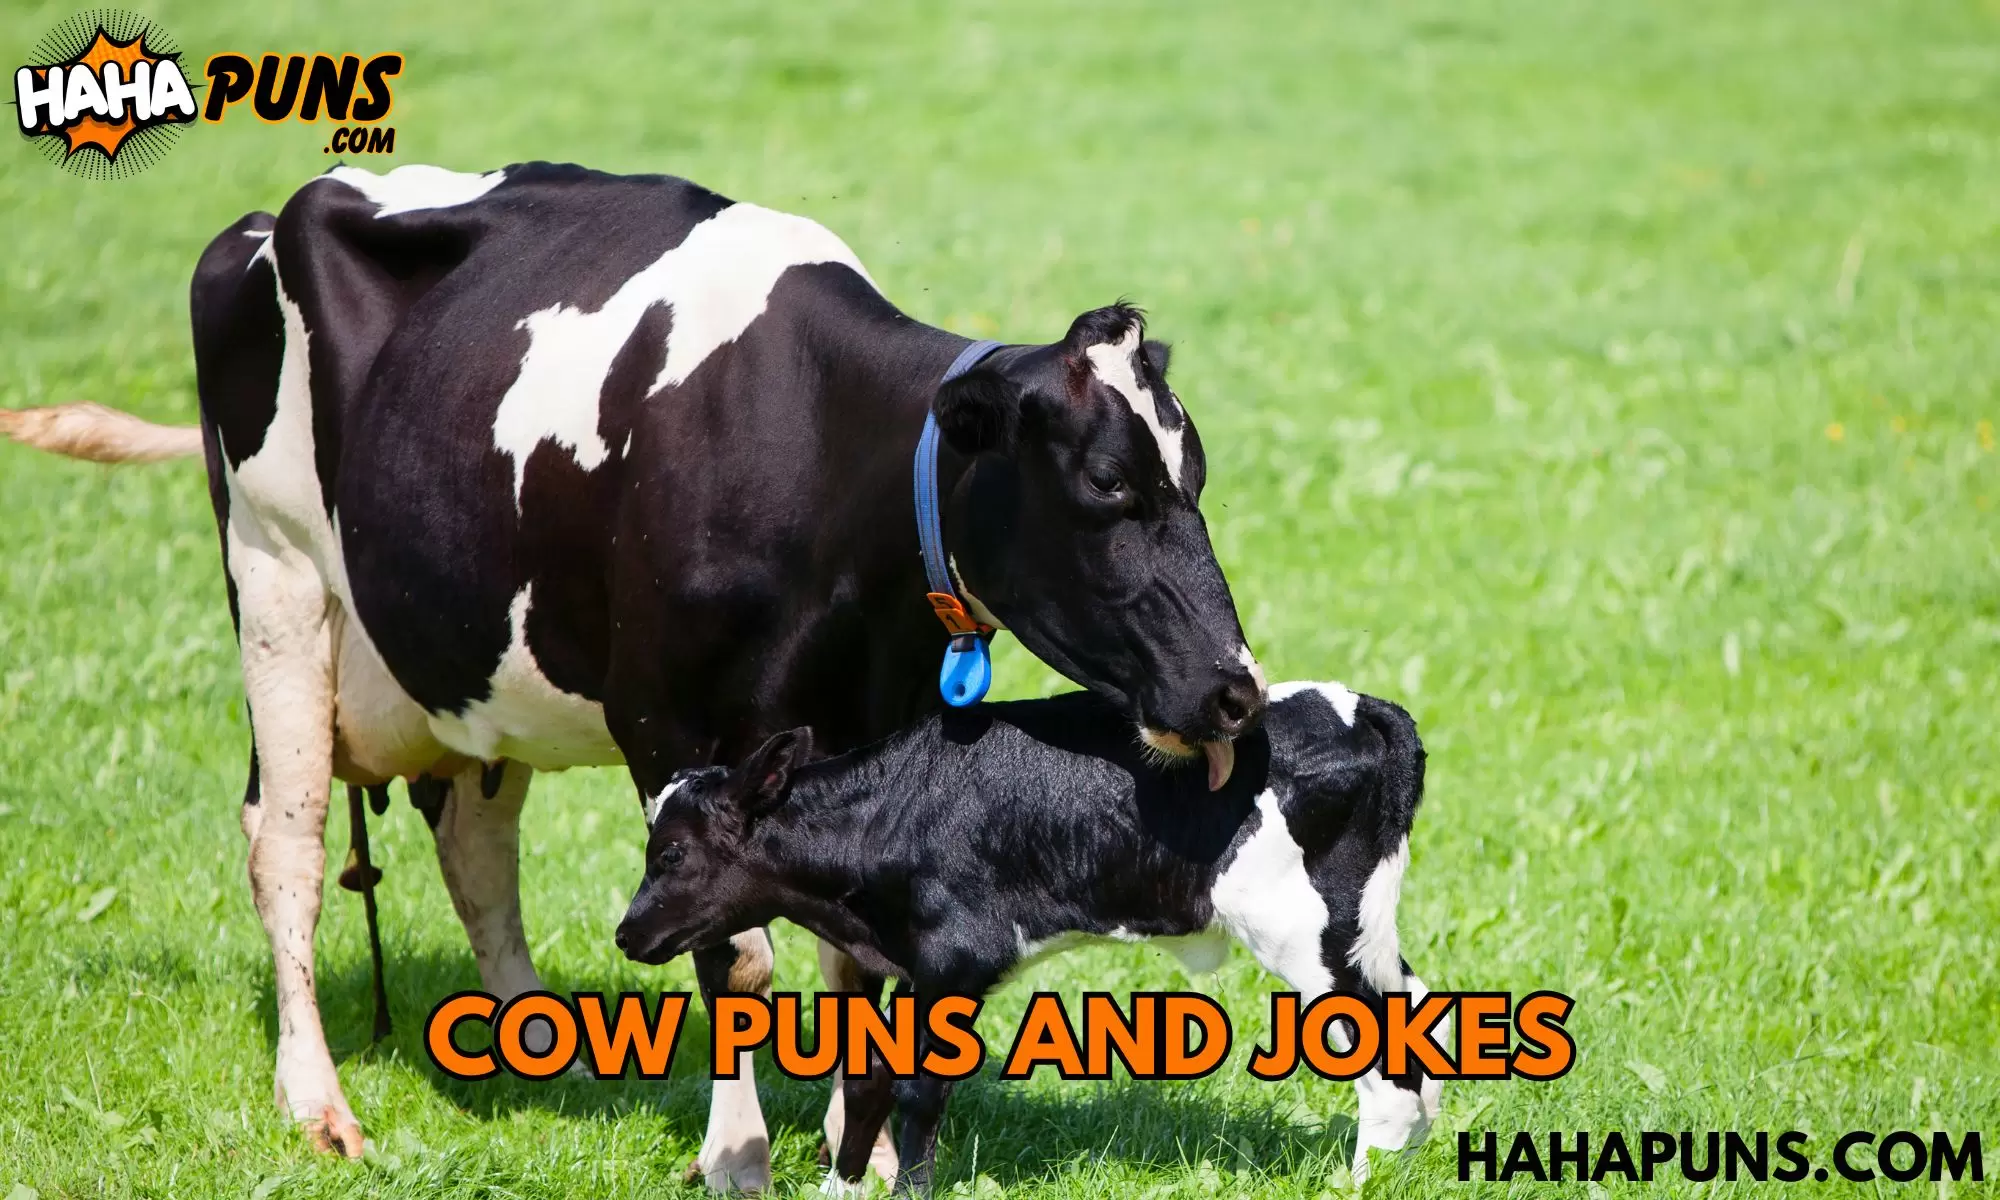 Cow Puns and Jokes